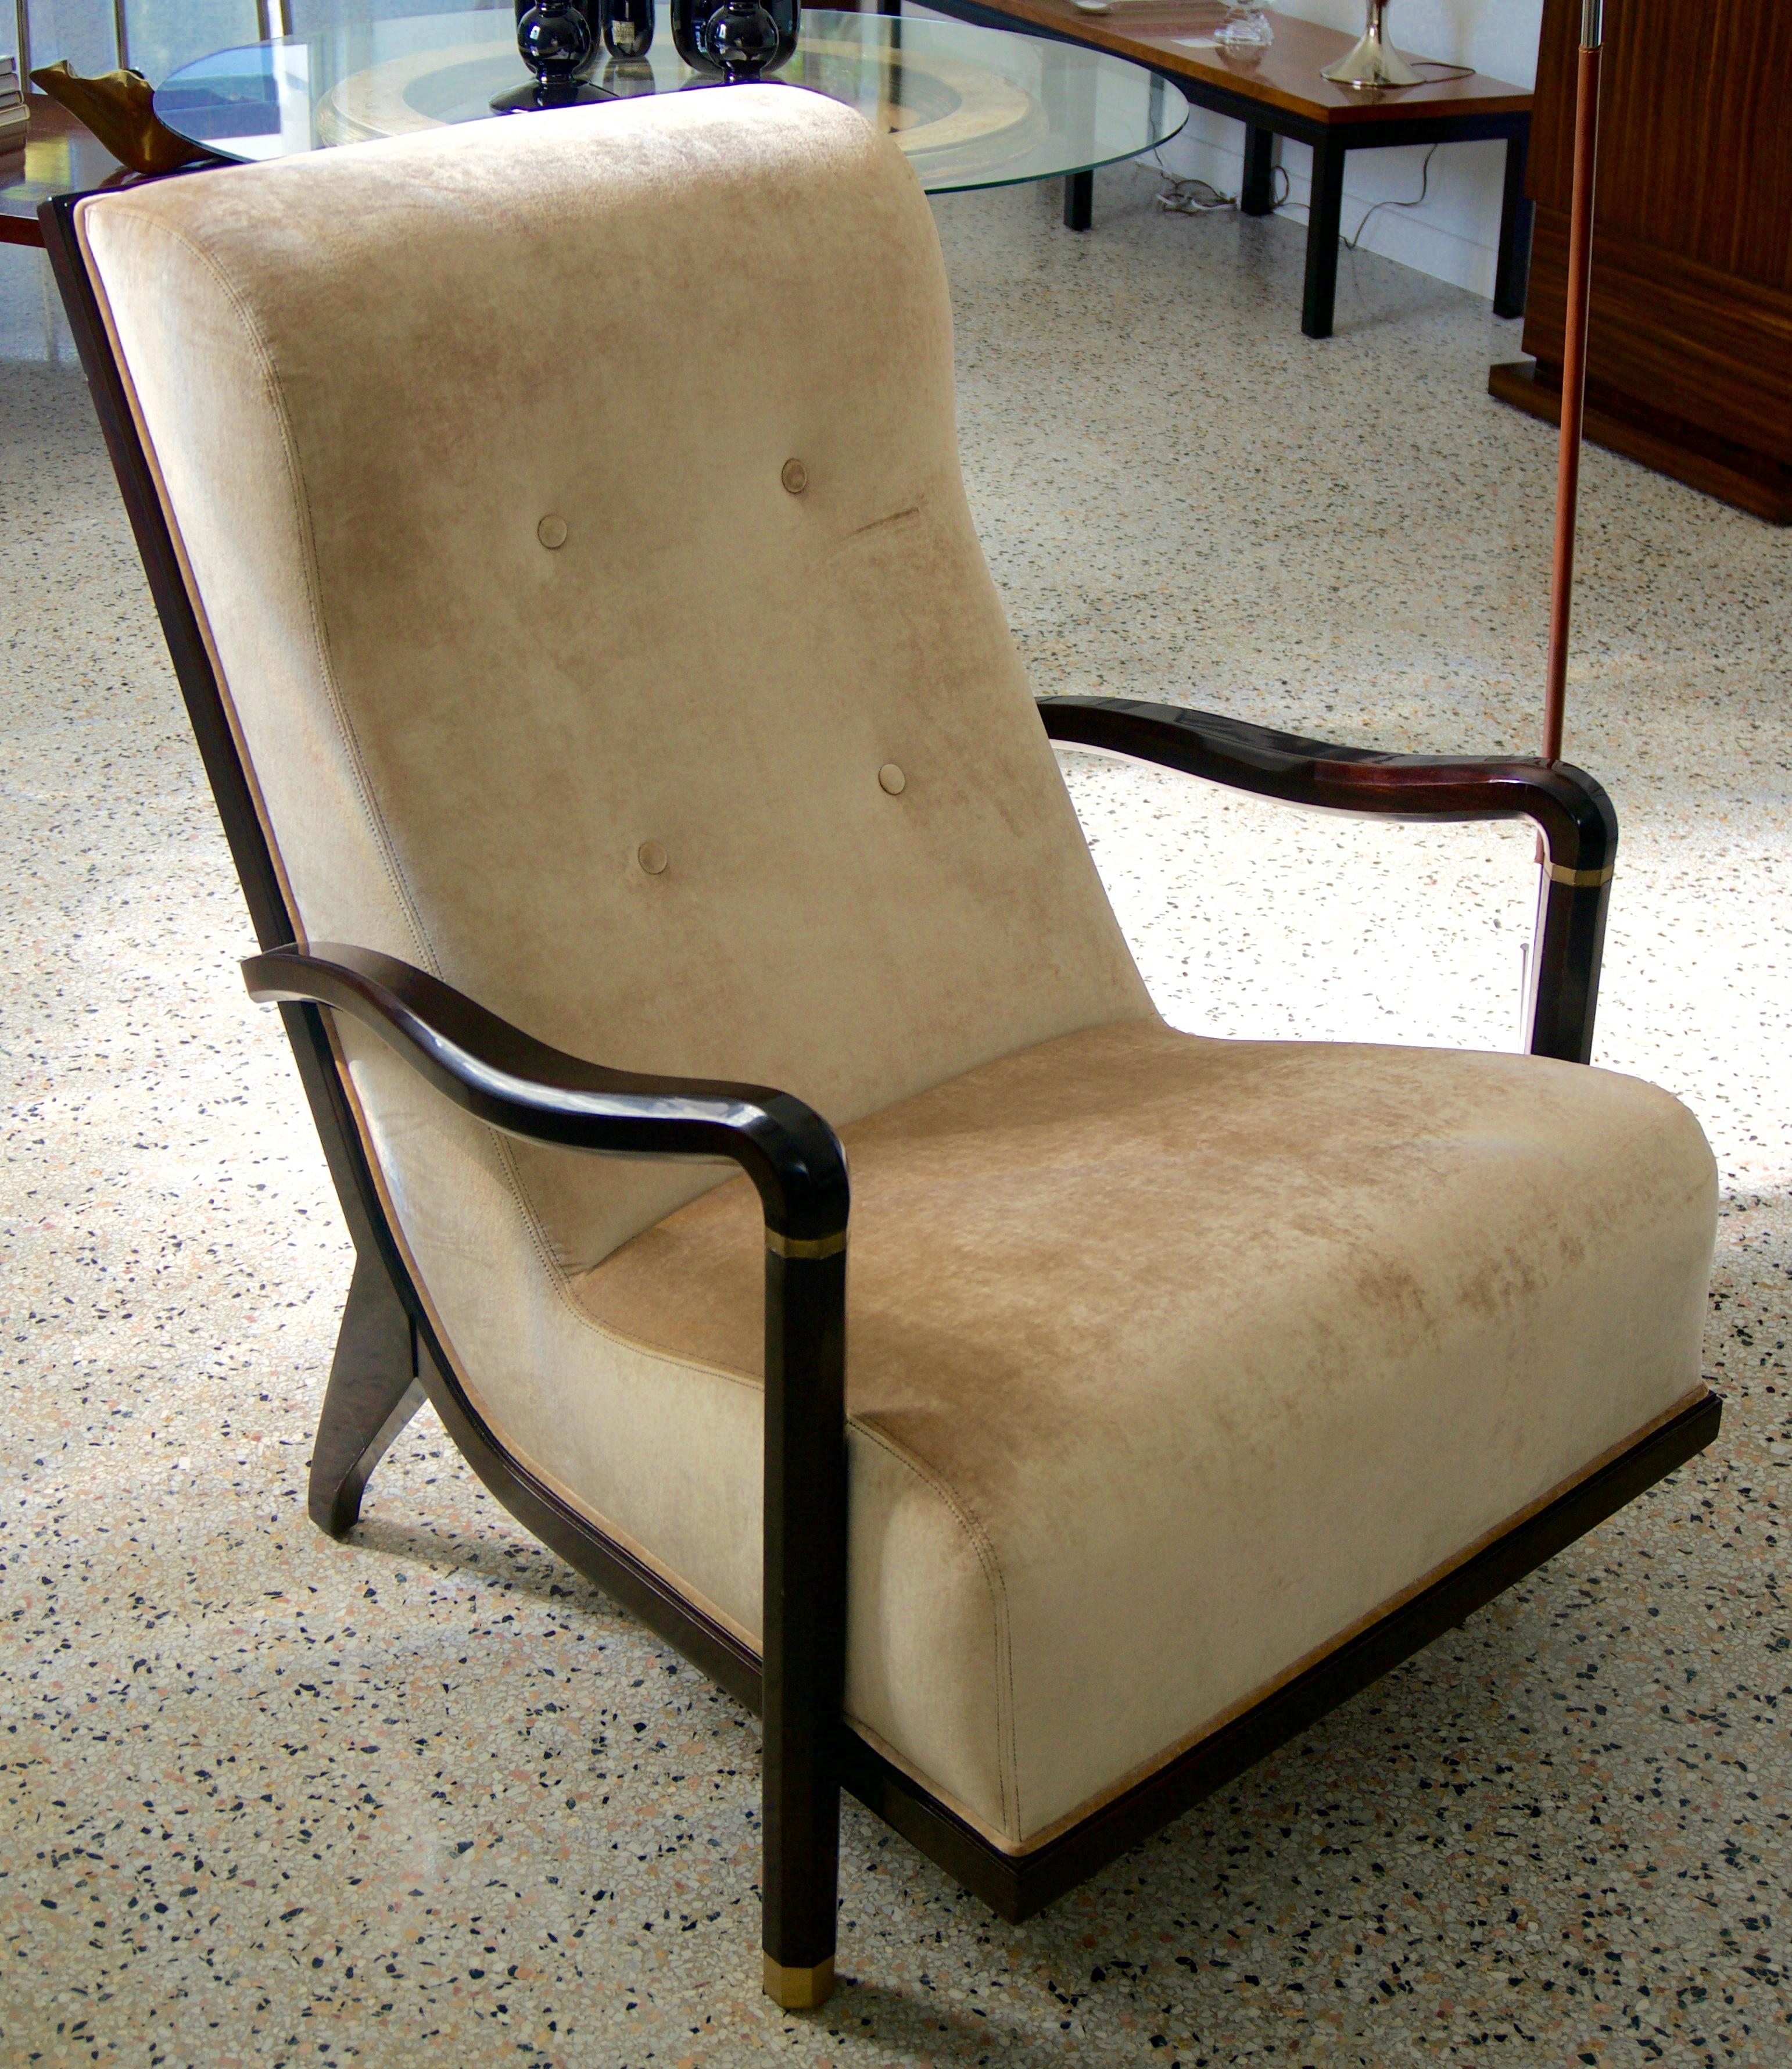 This stylish and chic Art Deco moderne style armchair was created by Lucien Rollan for the William Switzer company and is new old stock. The clean lines and form are very much in the style of pieces created by Andre Arbus. The fabric is a soft,